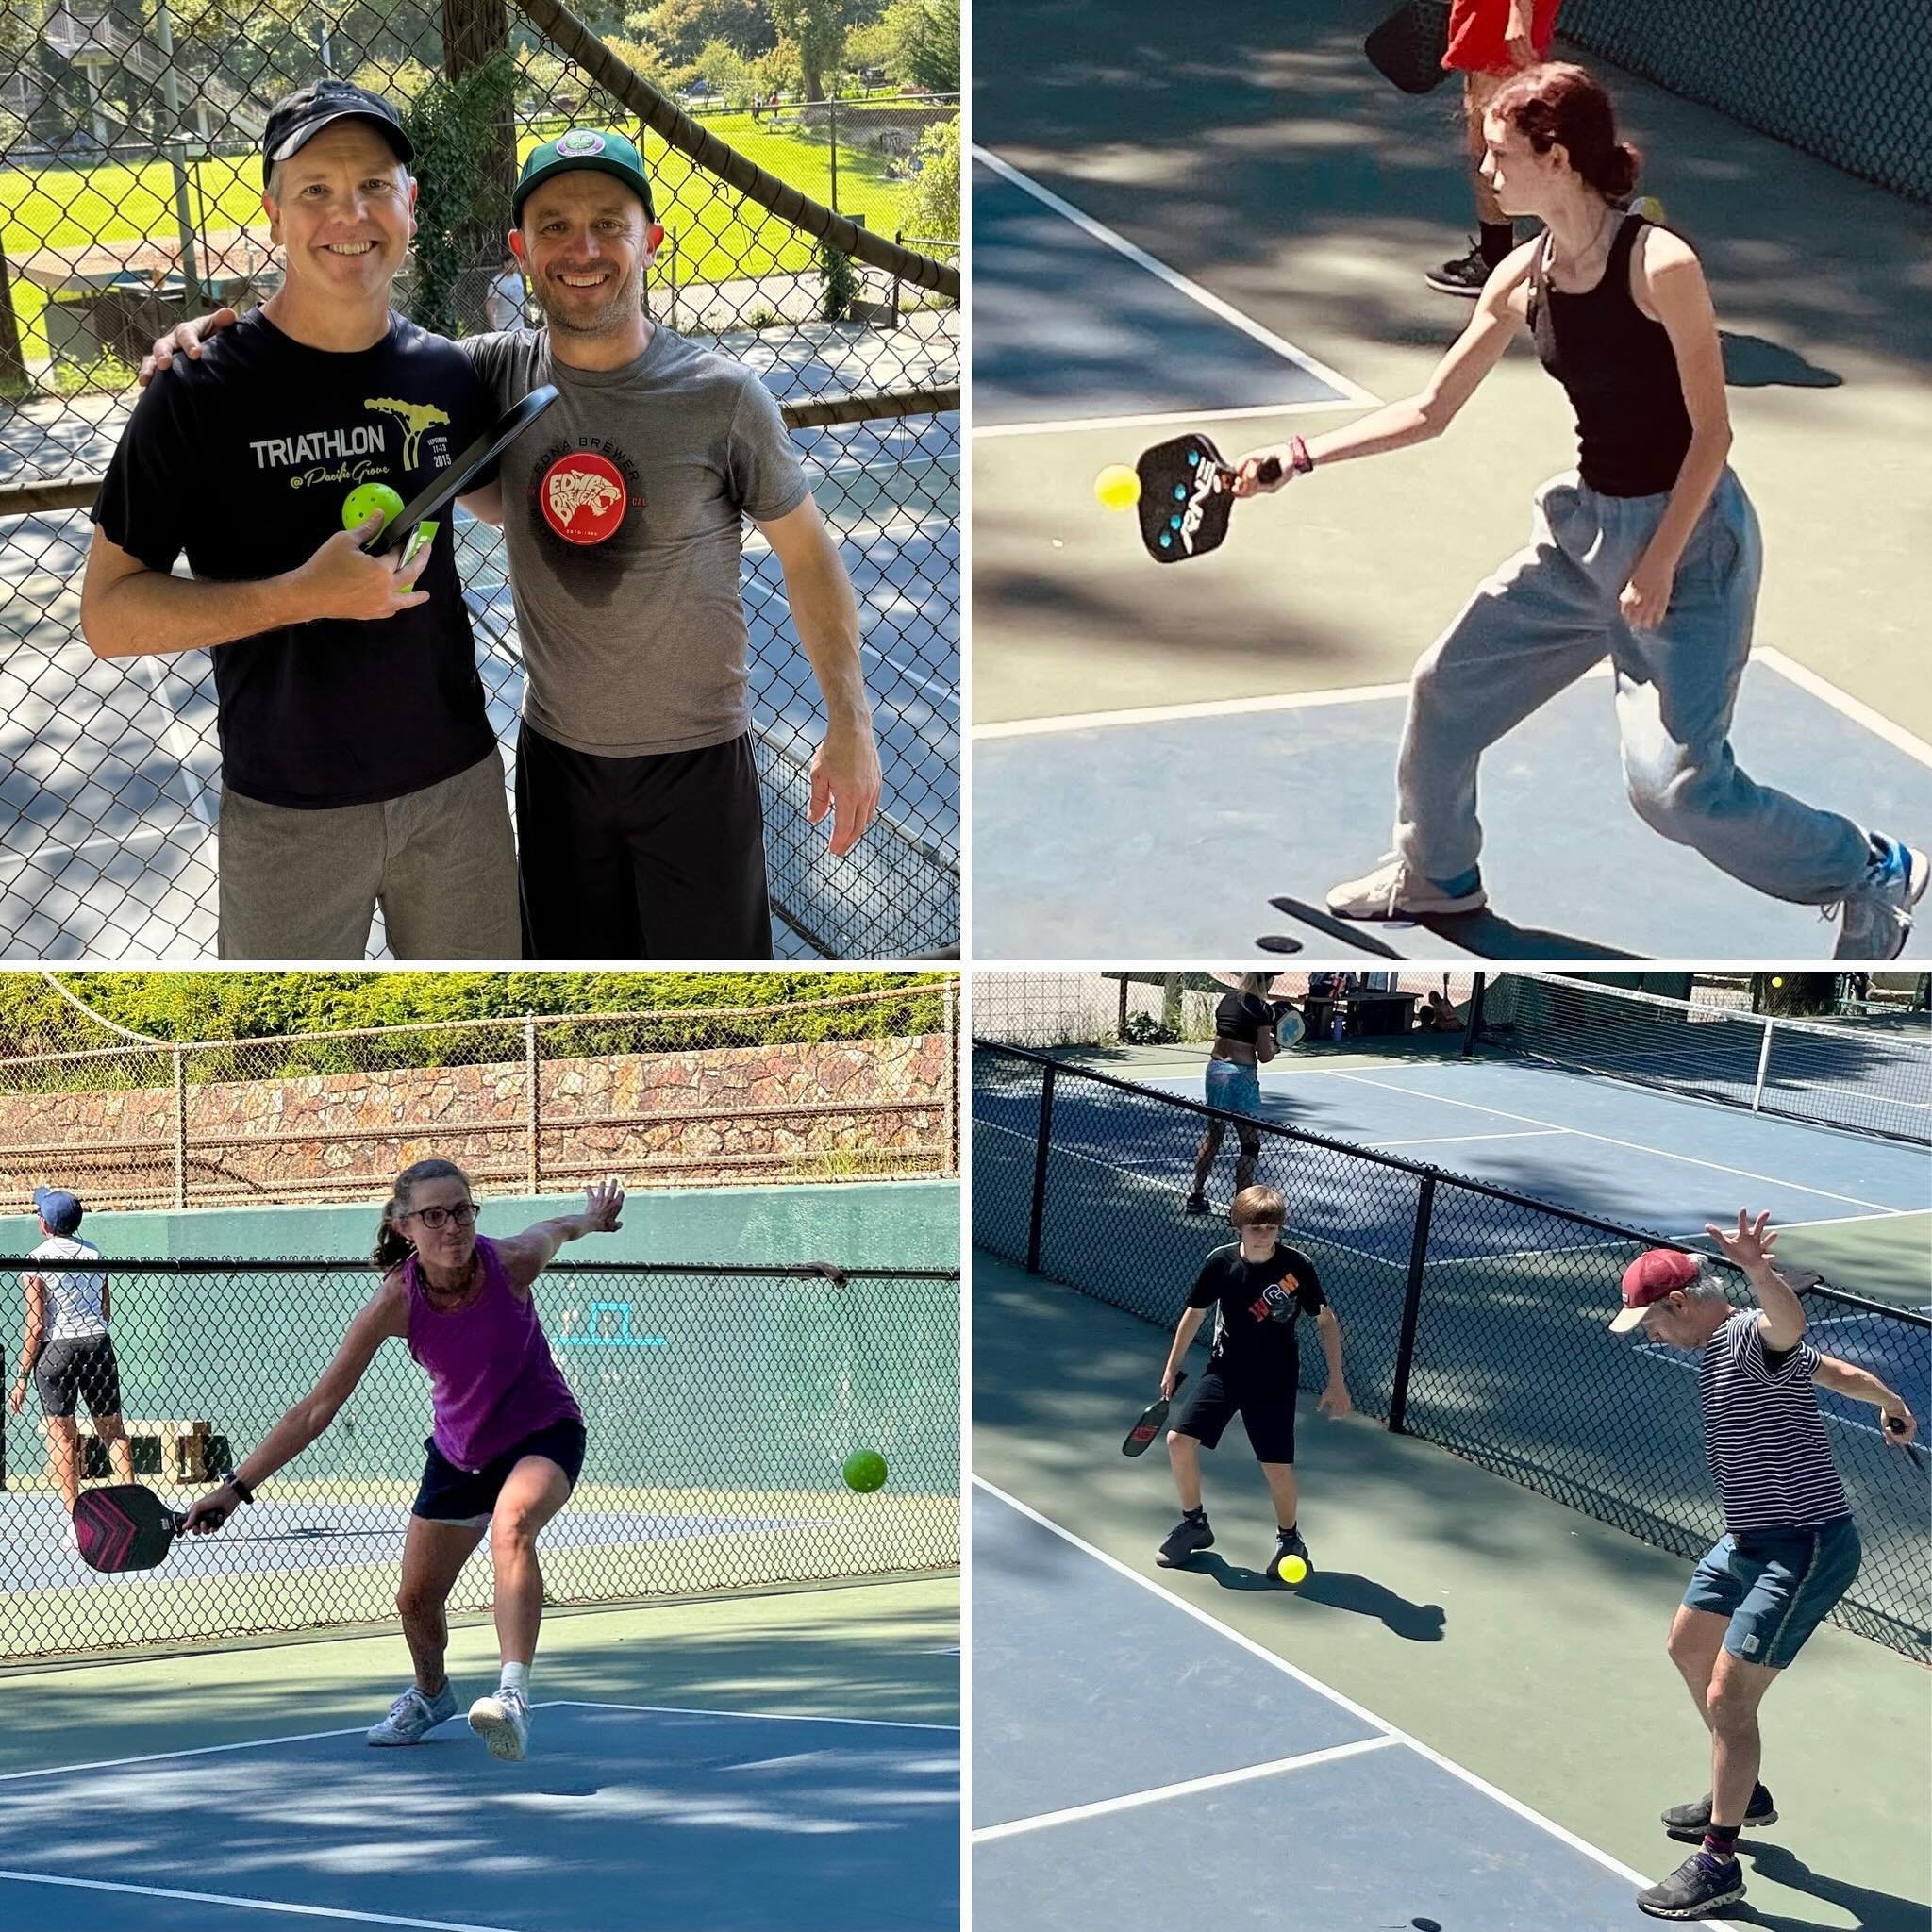 The Panther Pickleball Tournament raised more than $500 for Edna Brewer Middle School, and the players had a lot of fun doing it! Thank you to the hosts, and it&rsquo;s not too late to check out our other hosted parties at bit.ly/BIDebms.

#Ednabrewe